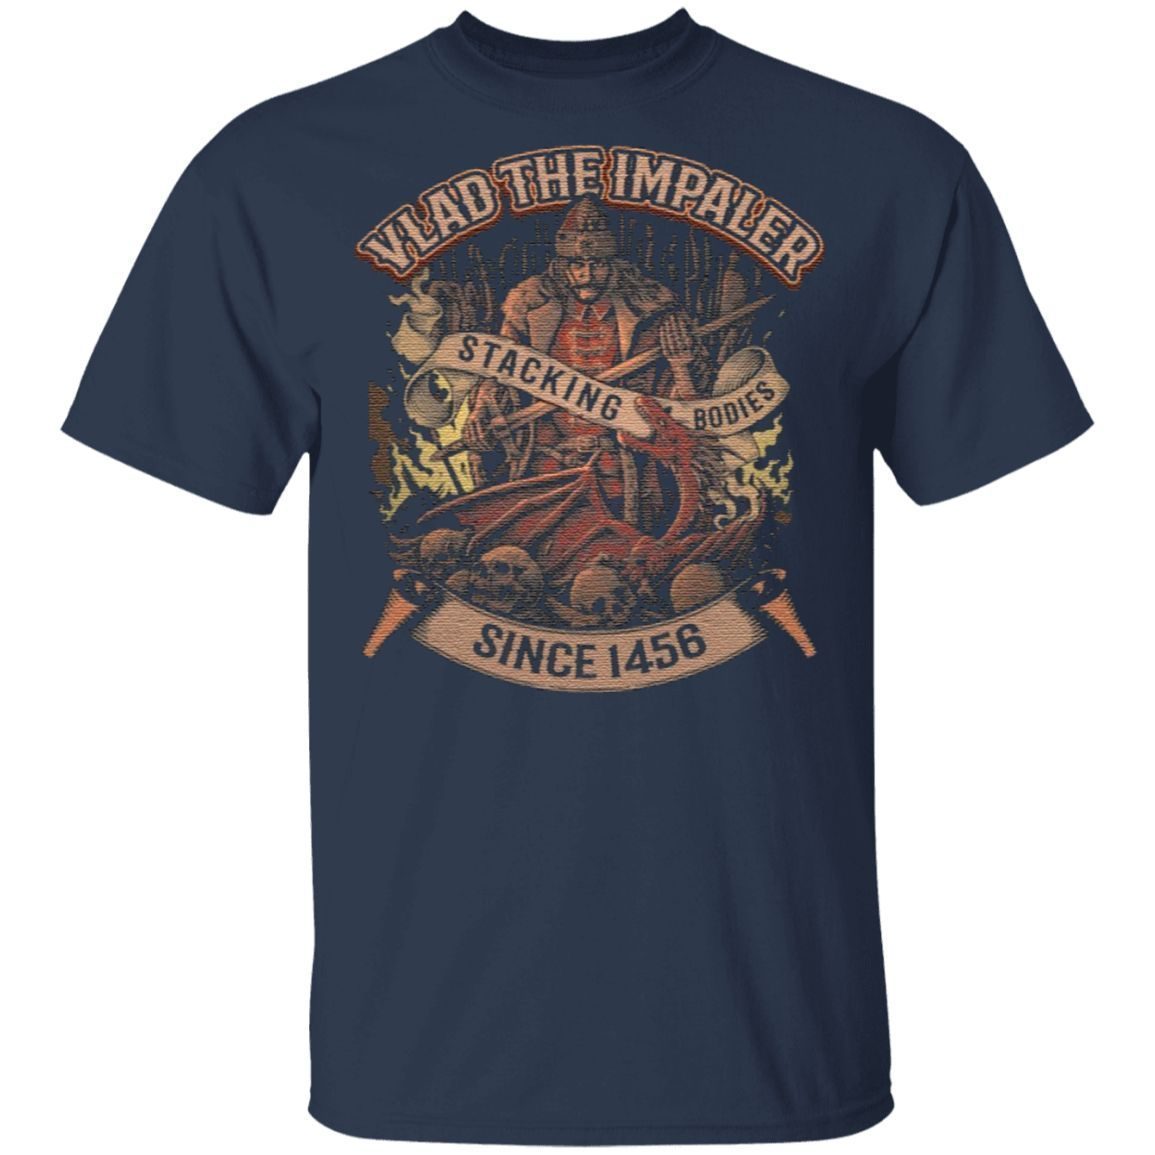 Vlad The Impaler Stacking Bodies Since 1456 T Shirt